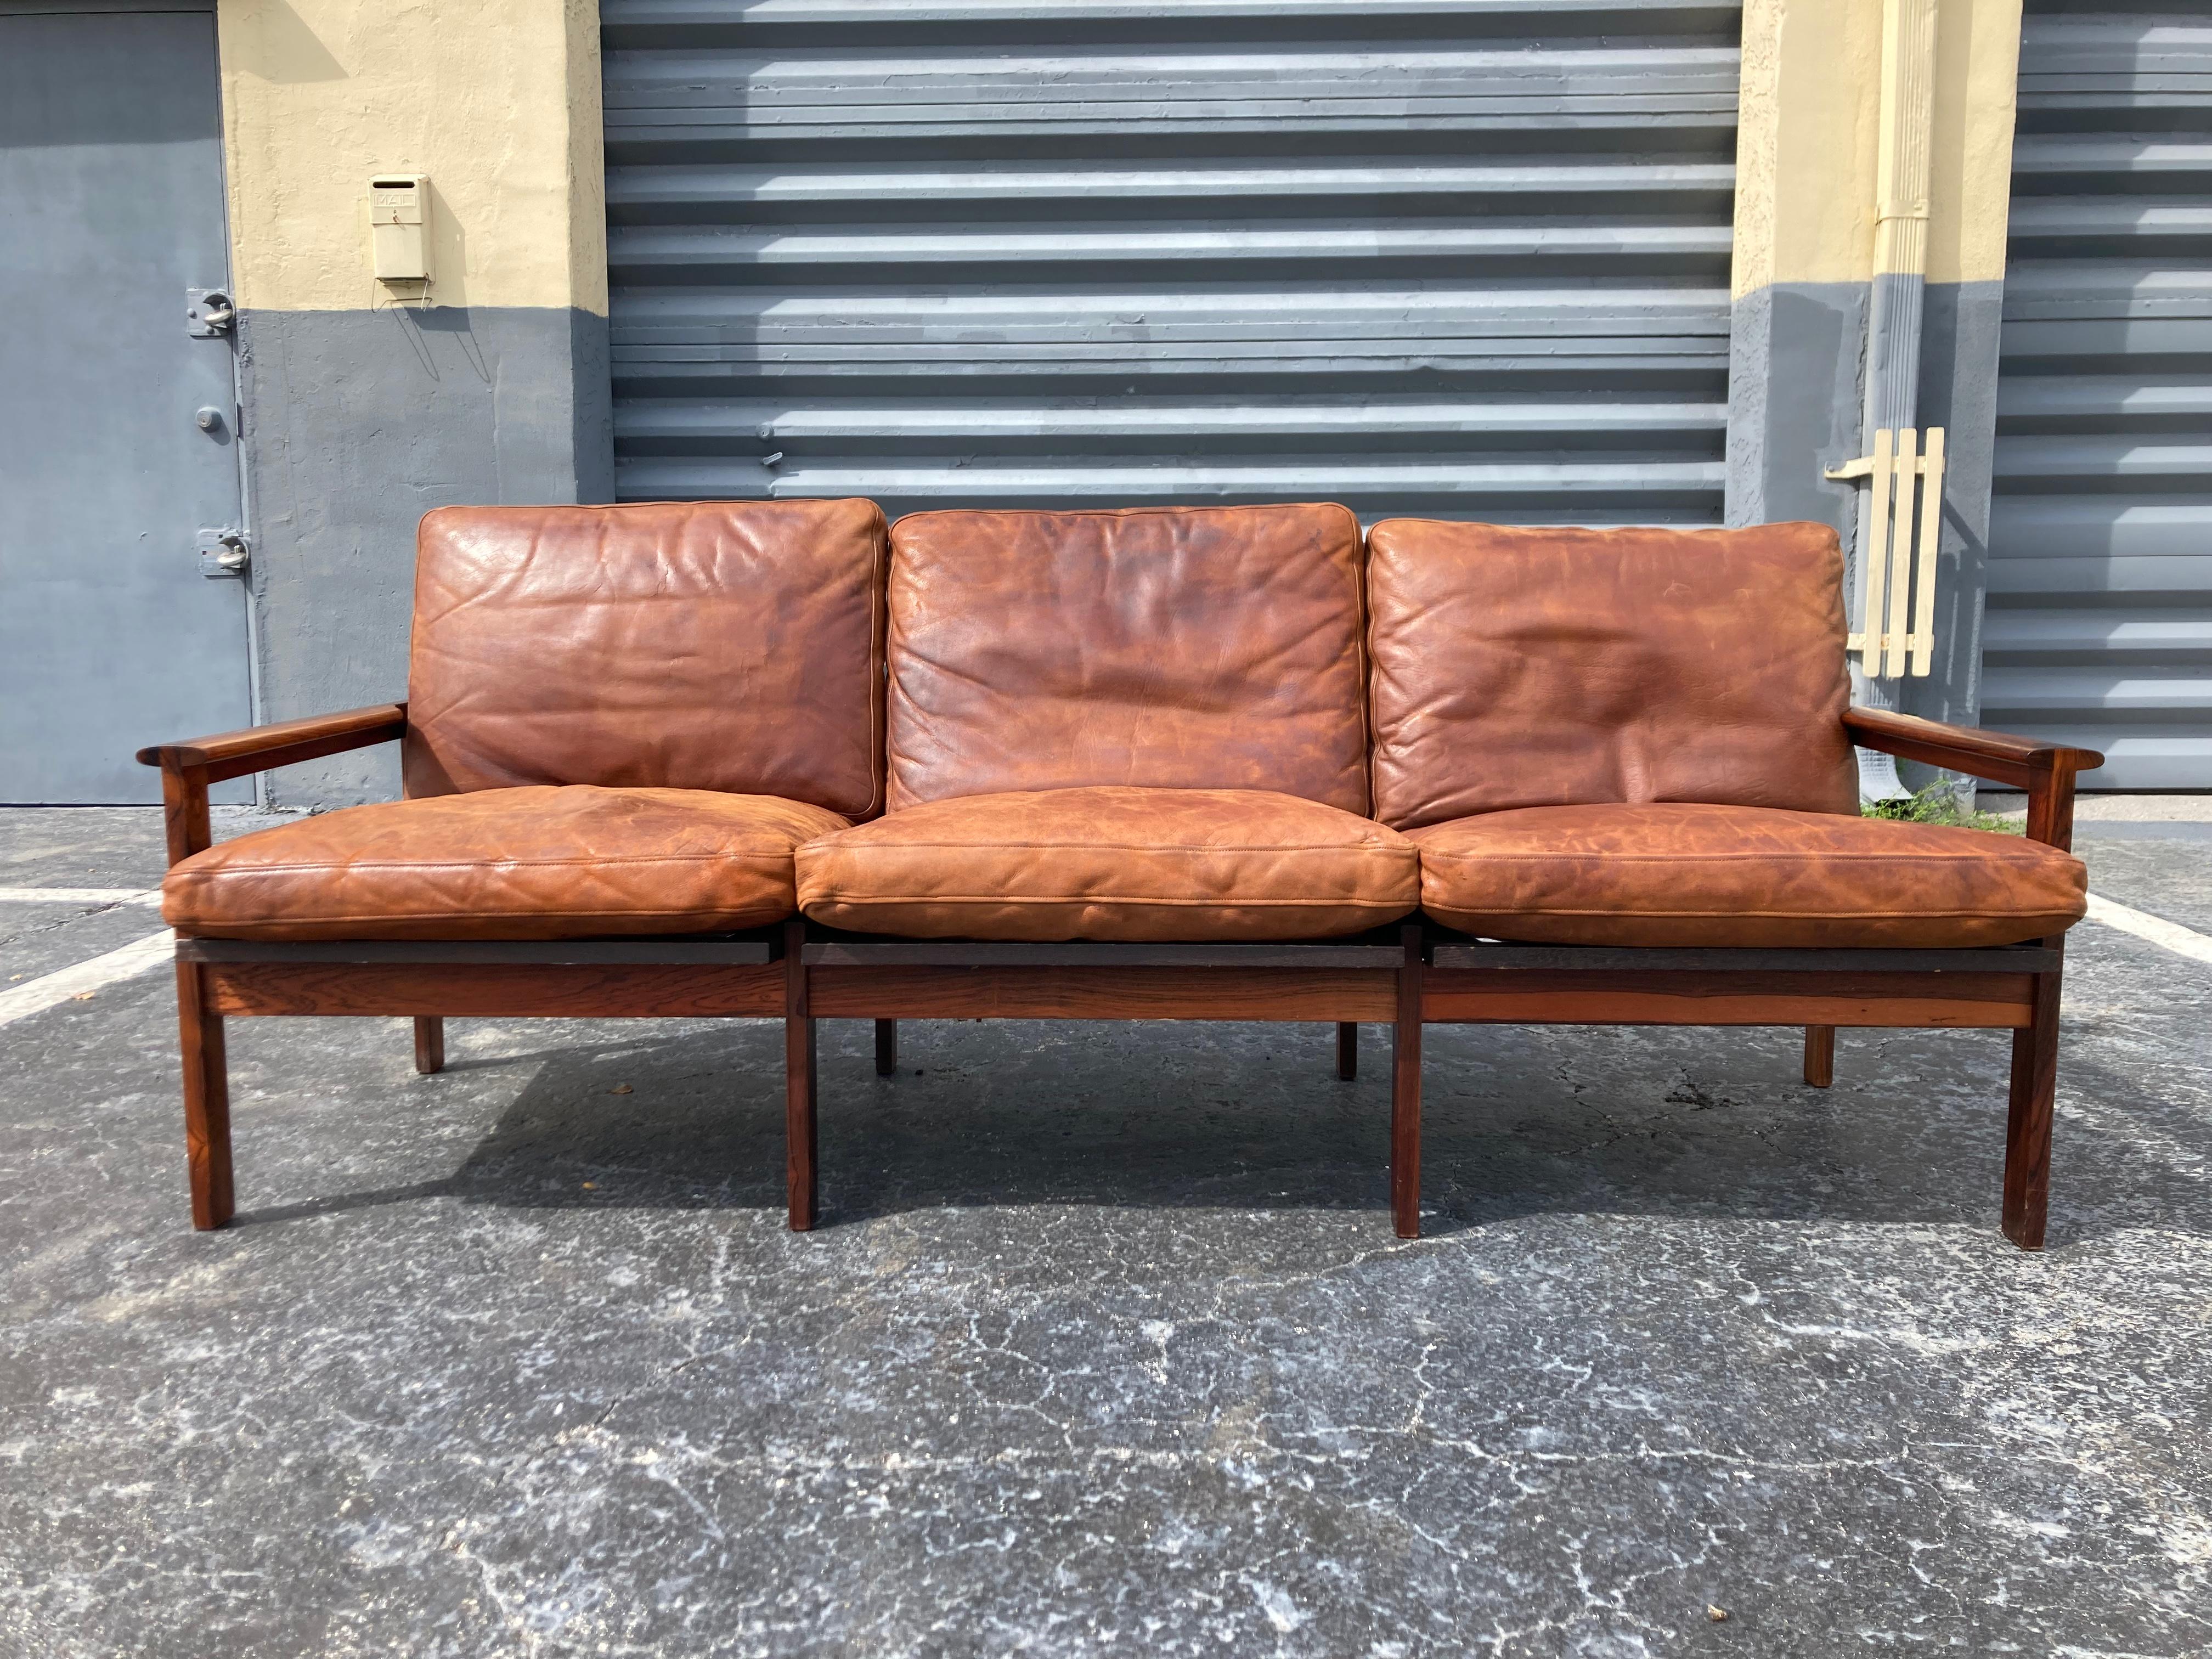 Beautiful Rosewood sofa with cognac leather cushions designed by Illum Wikkelsø.
All original condition.
The Rosewood is beautiful with some normal age-related wear. The leather feels still soft but does have some areas that are dry and starting